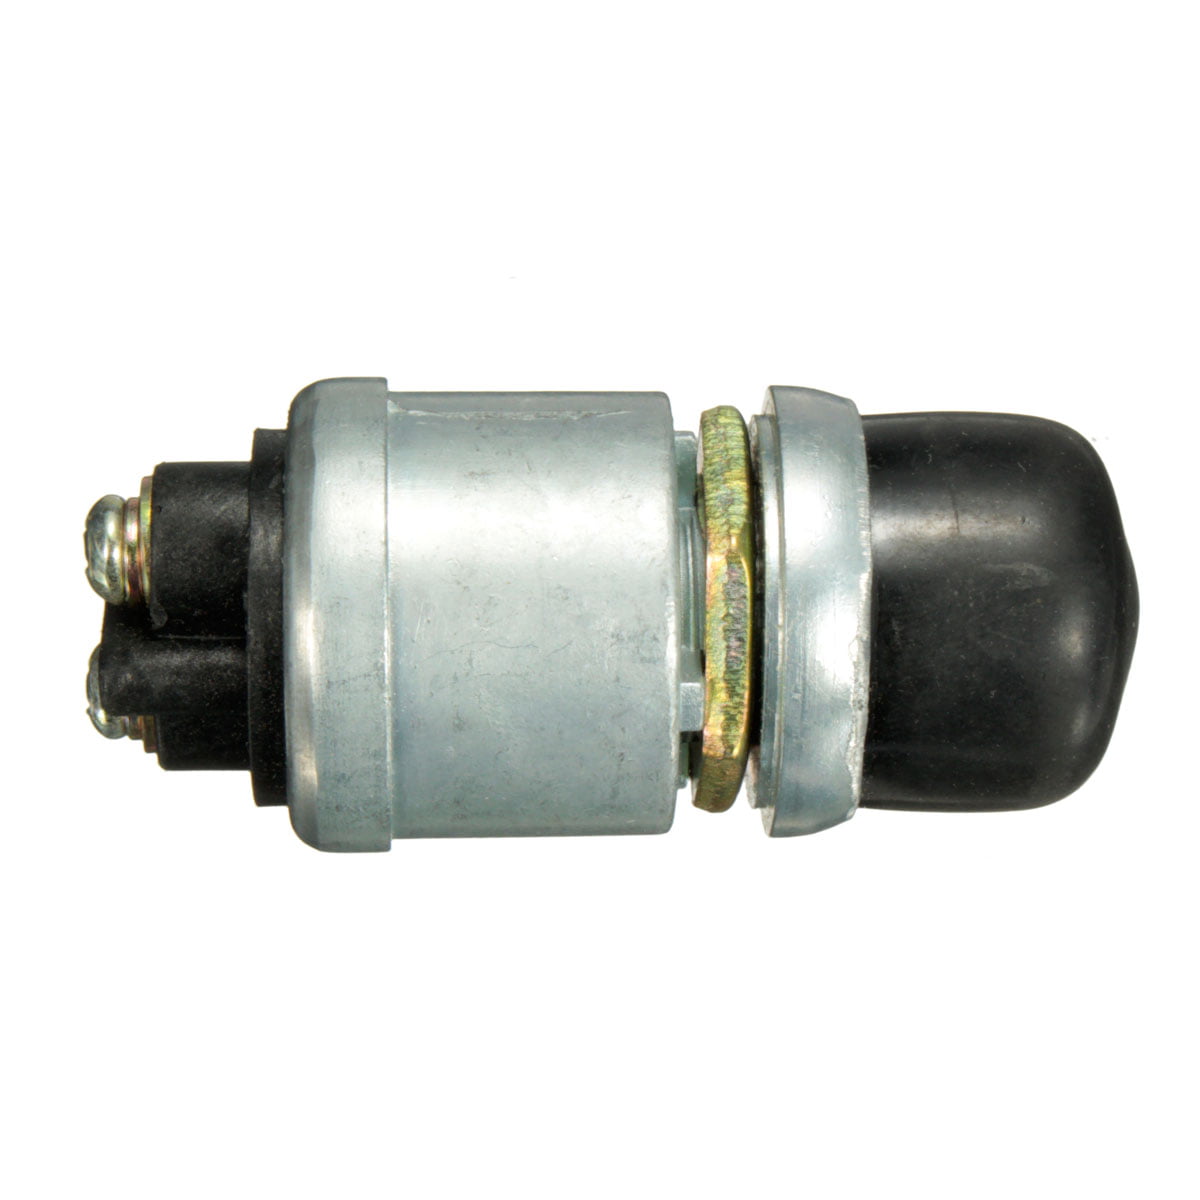 Details about   12V DC Heavy Duty Momentary Start Button Push Switch Car Boat Horn Engine NIU yL 